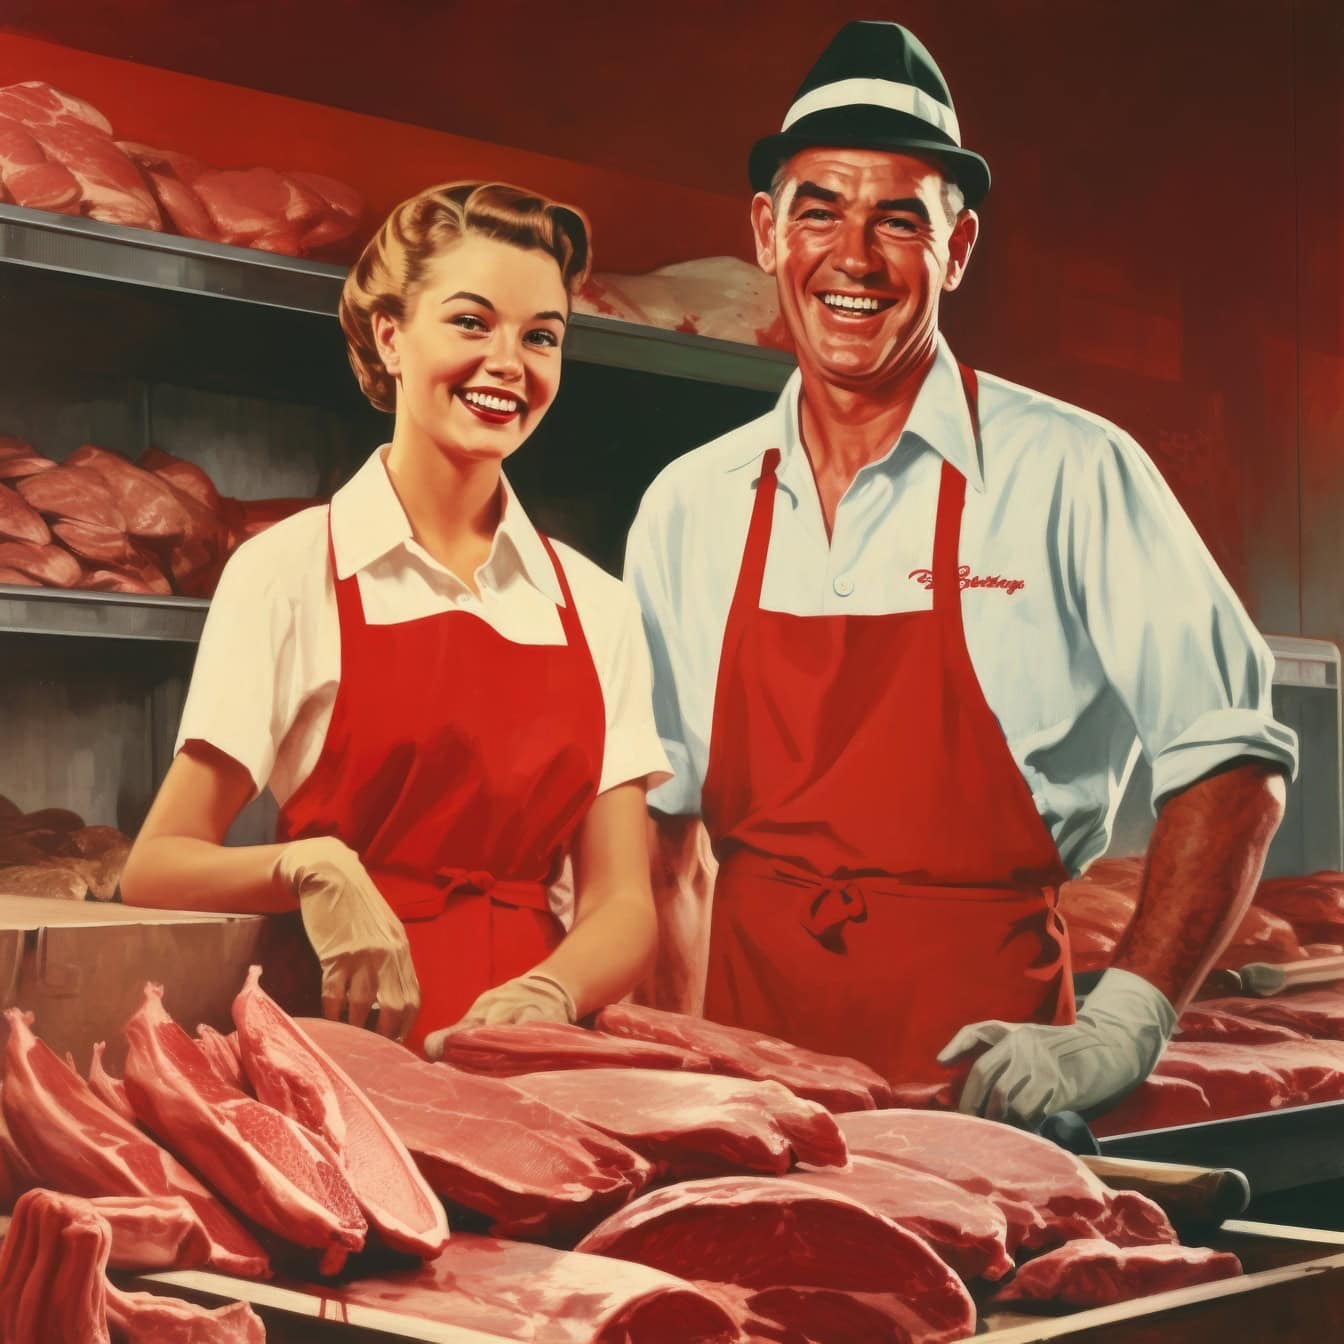 A butcher and a woman standing in a butcher shop, an illustration in the style of the 1970s,